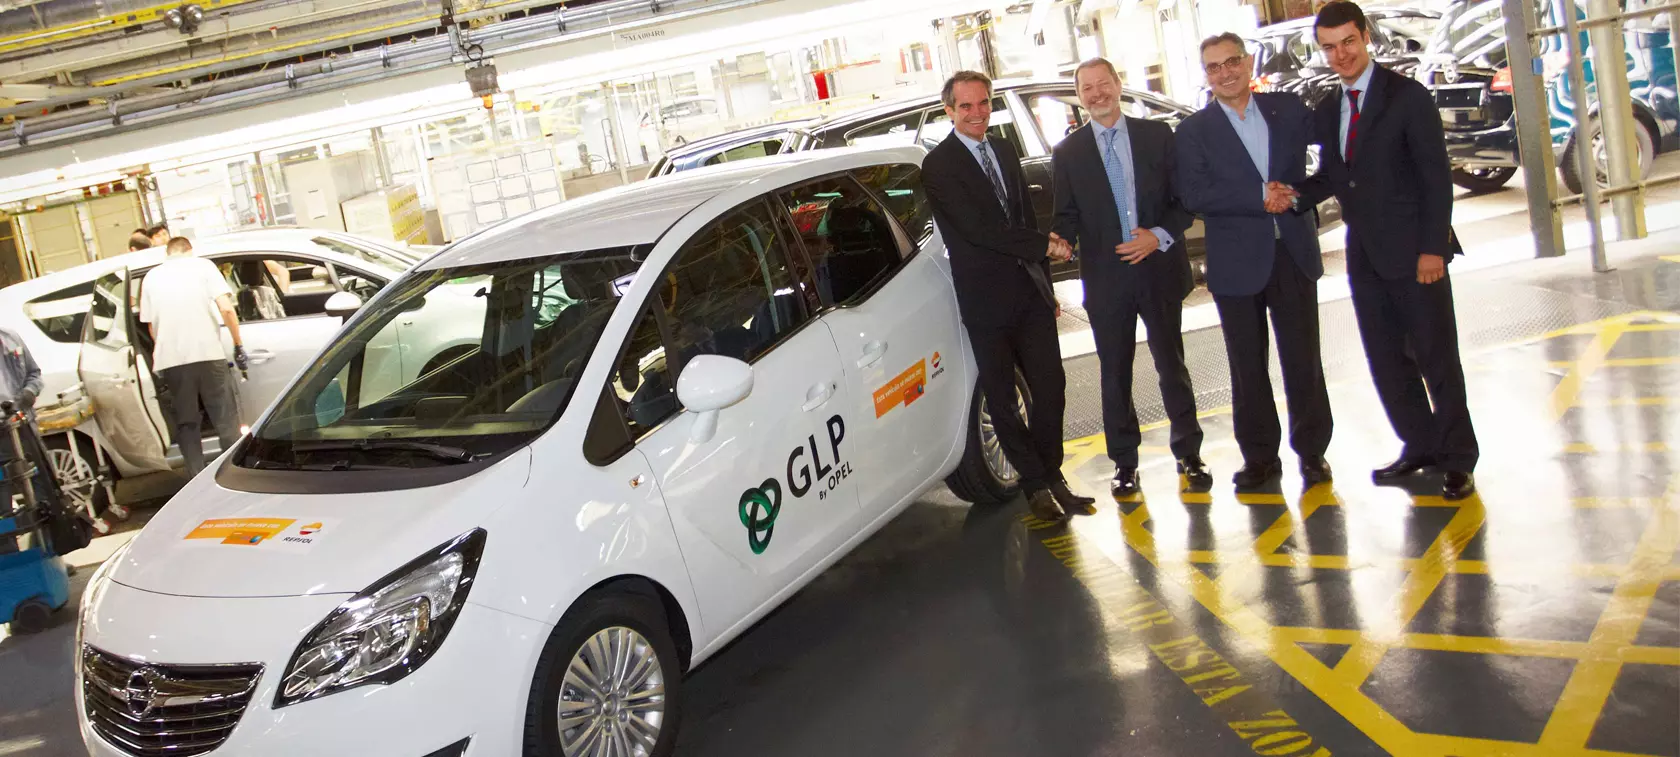 Opel and Repsol support autogas in Spain